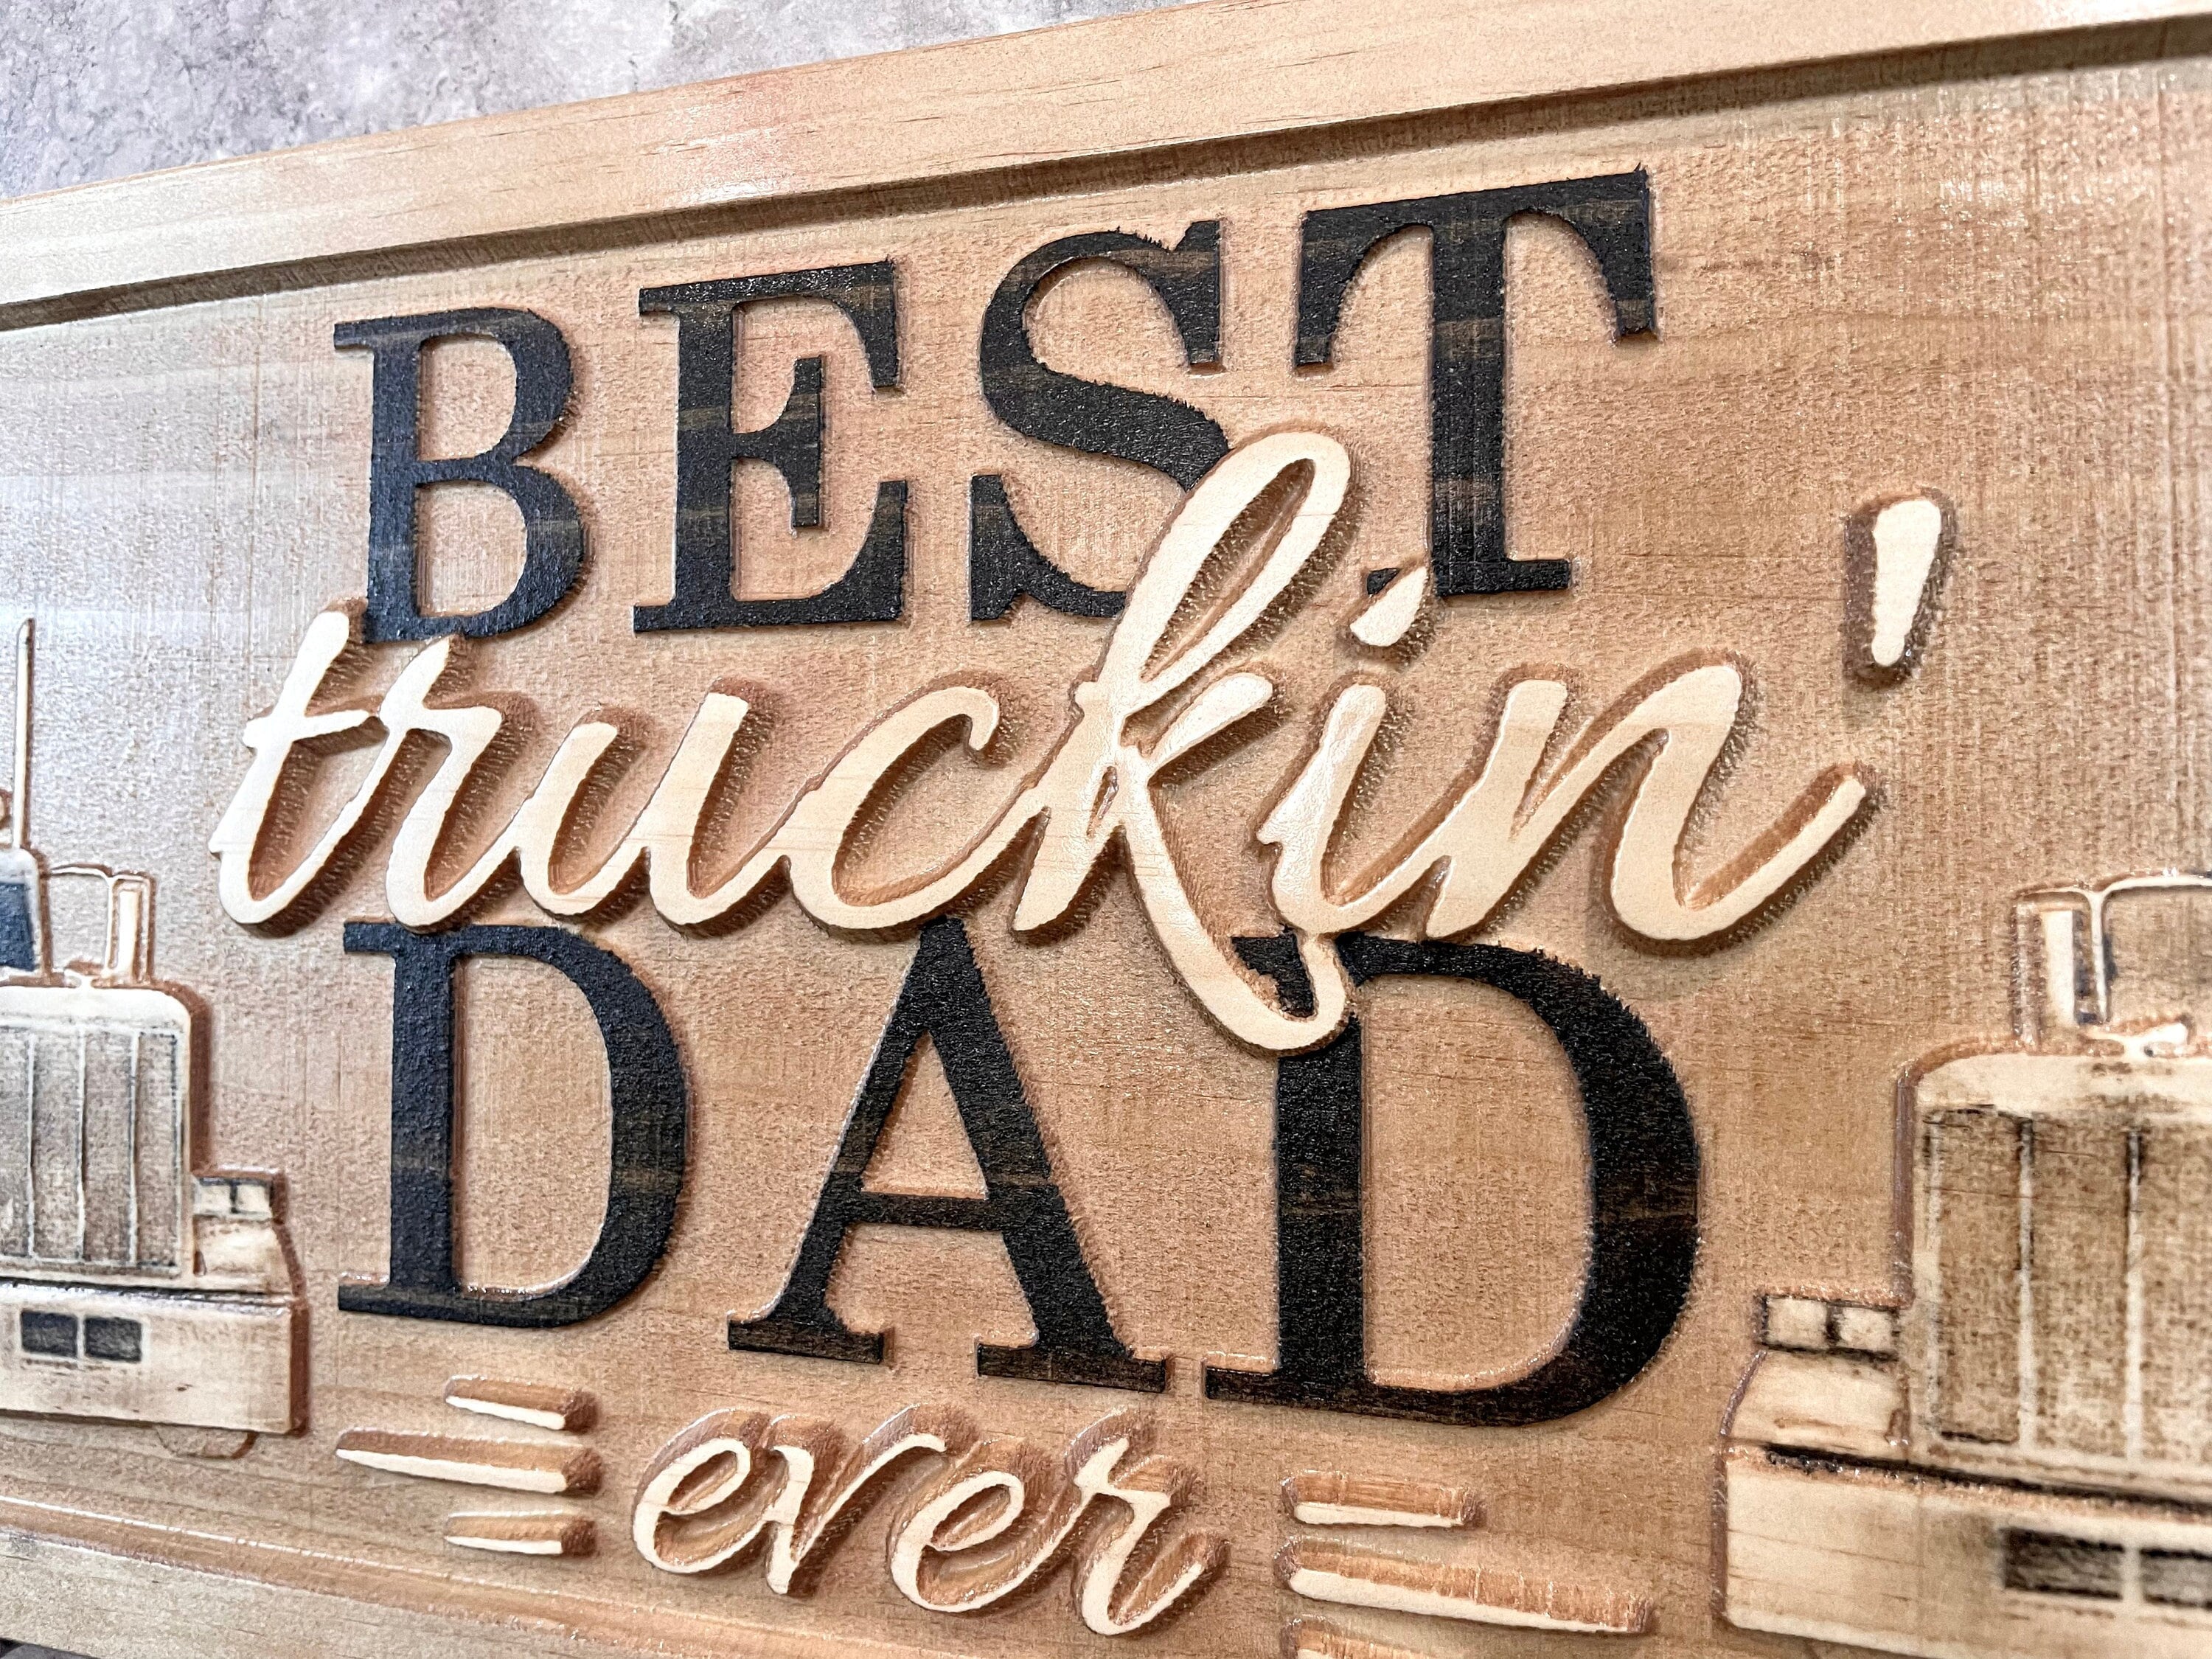 15 Best Gifts For Truckers